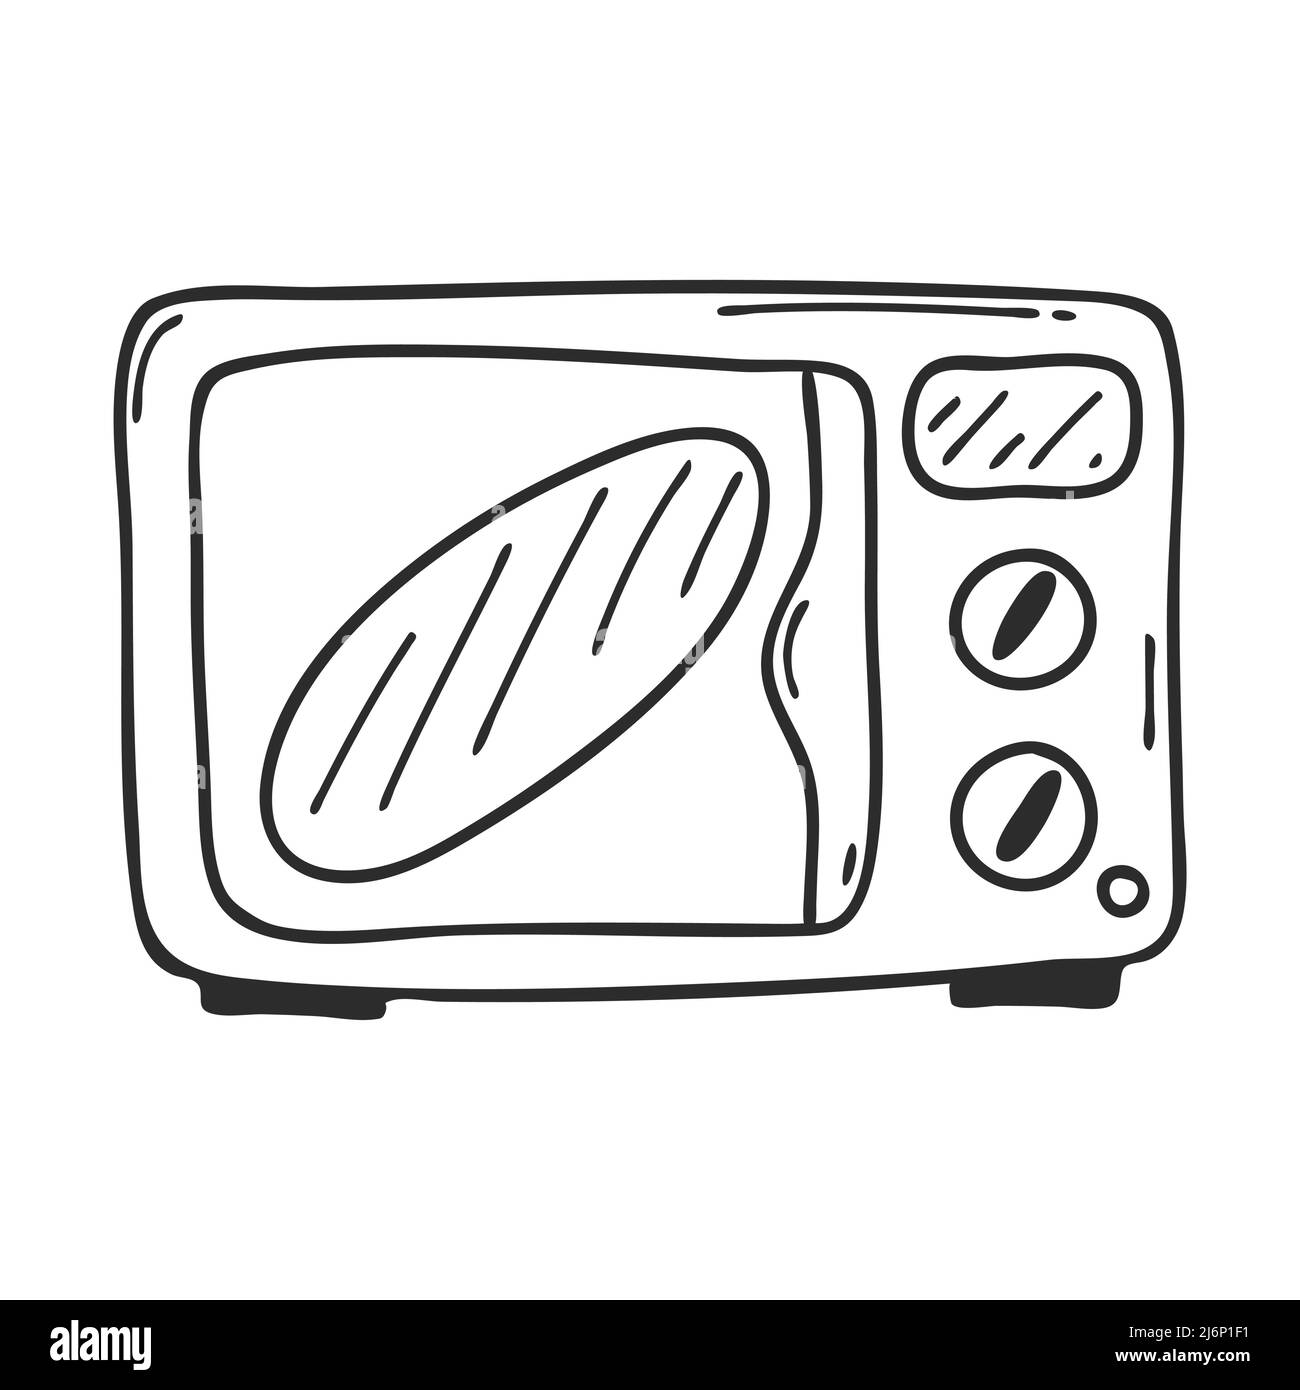 Oven in Doodle style.Kitchen electrical appliances for cooking.Design element for menu design,recipes and food packaging.Hand drawn and isolated on a Stock Vector